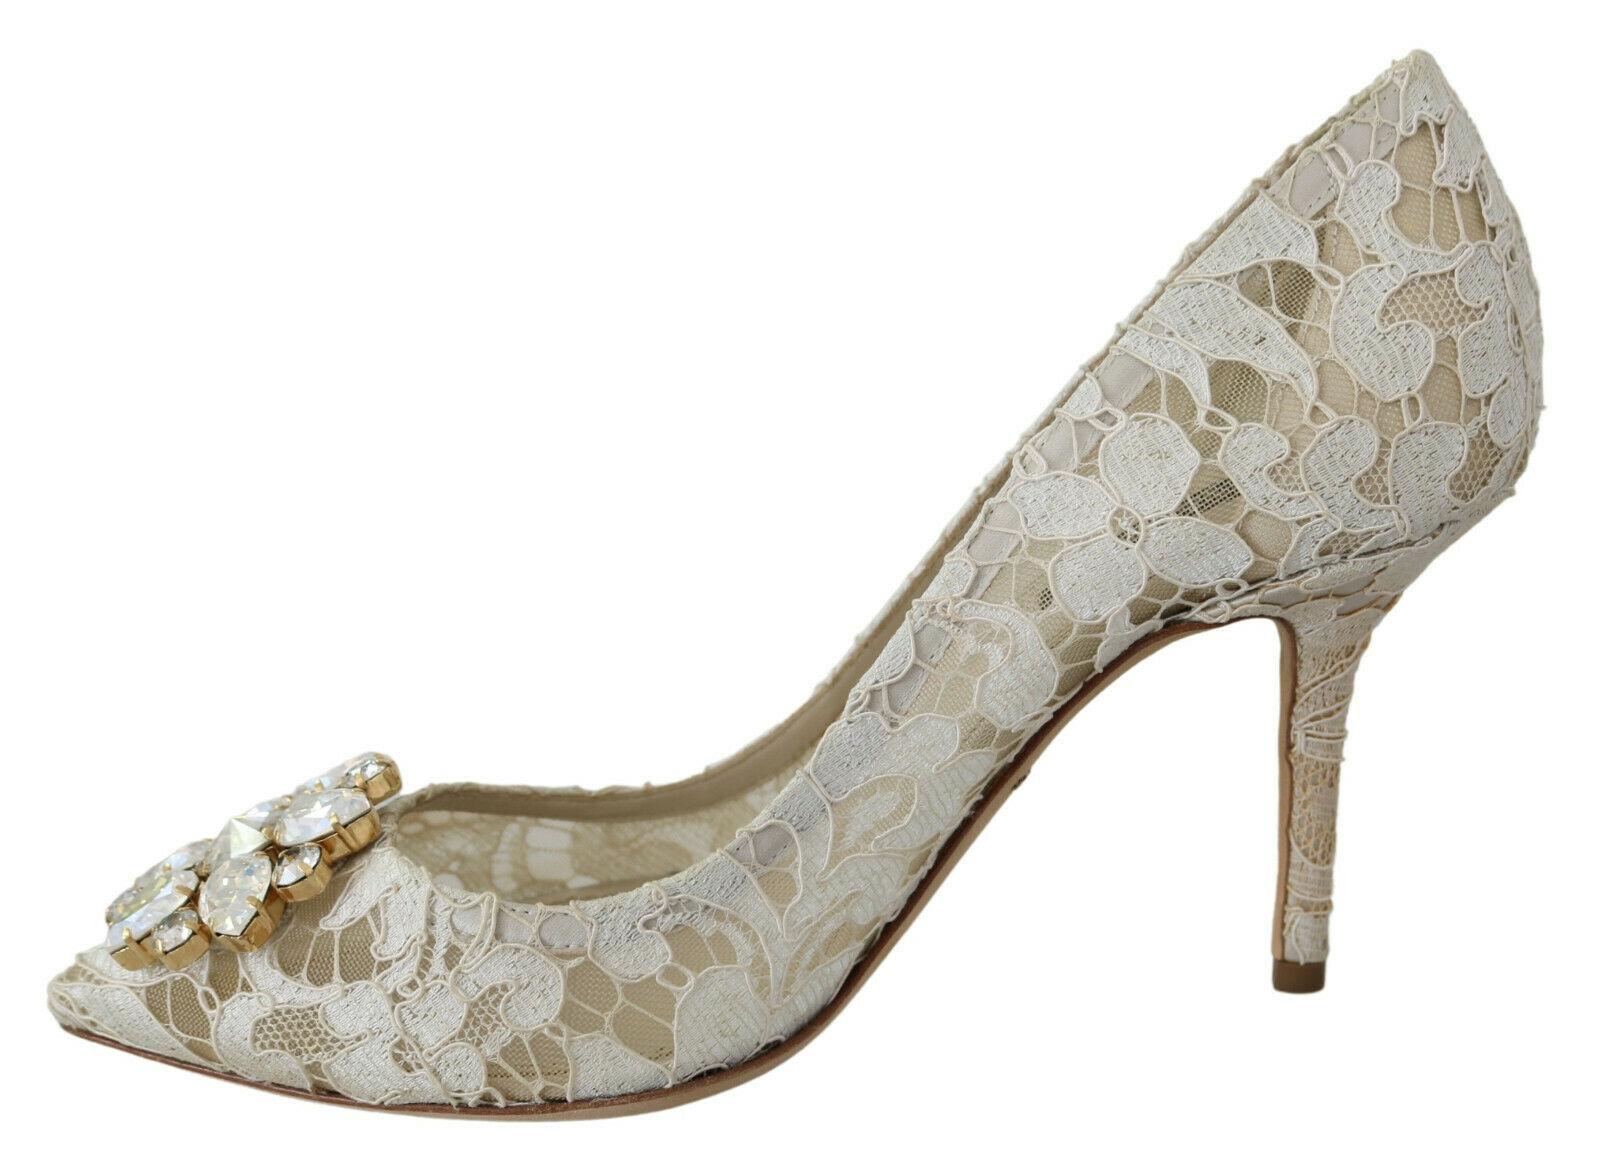 Gorgeous brand new with tags, 100% Authentic Dolce & Gabbana Pointy pumps with jewel rhinestones.

 
Model: Pumps


Color: White
Material: 57% Viscose 36% Cotton 5% Nylon 2% Silk

Sole: Leather

Logo details

Very high quality and comfort

Made in